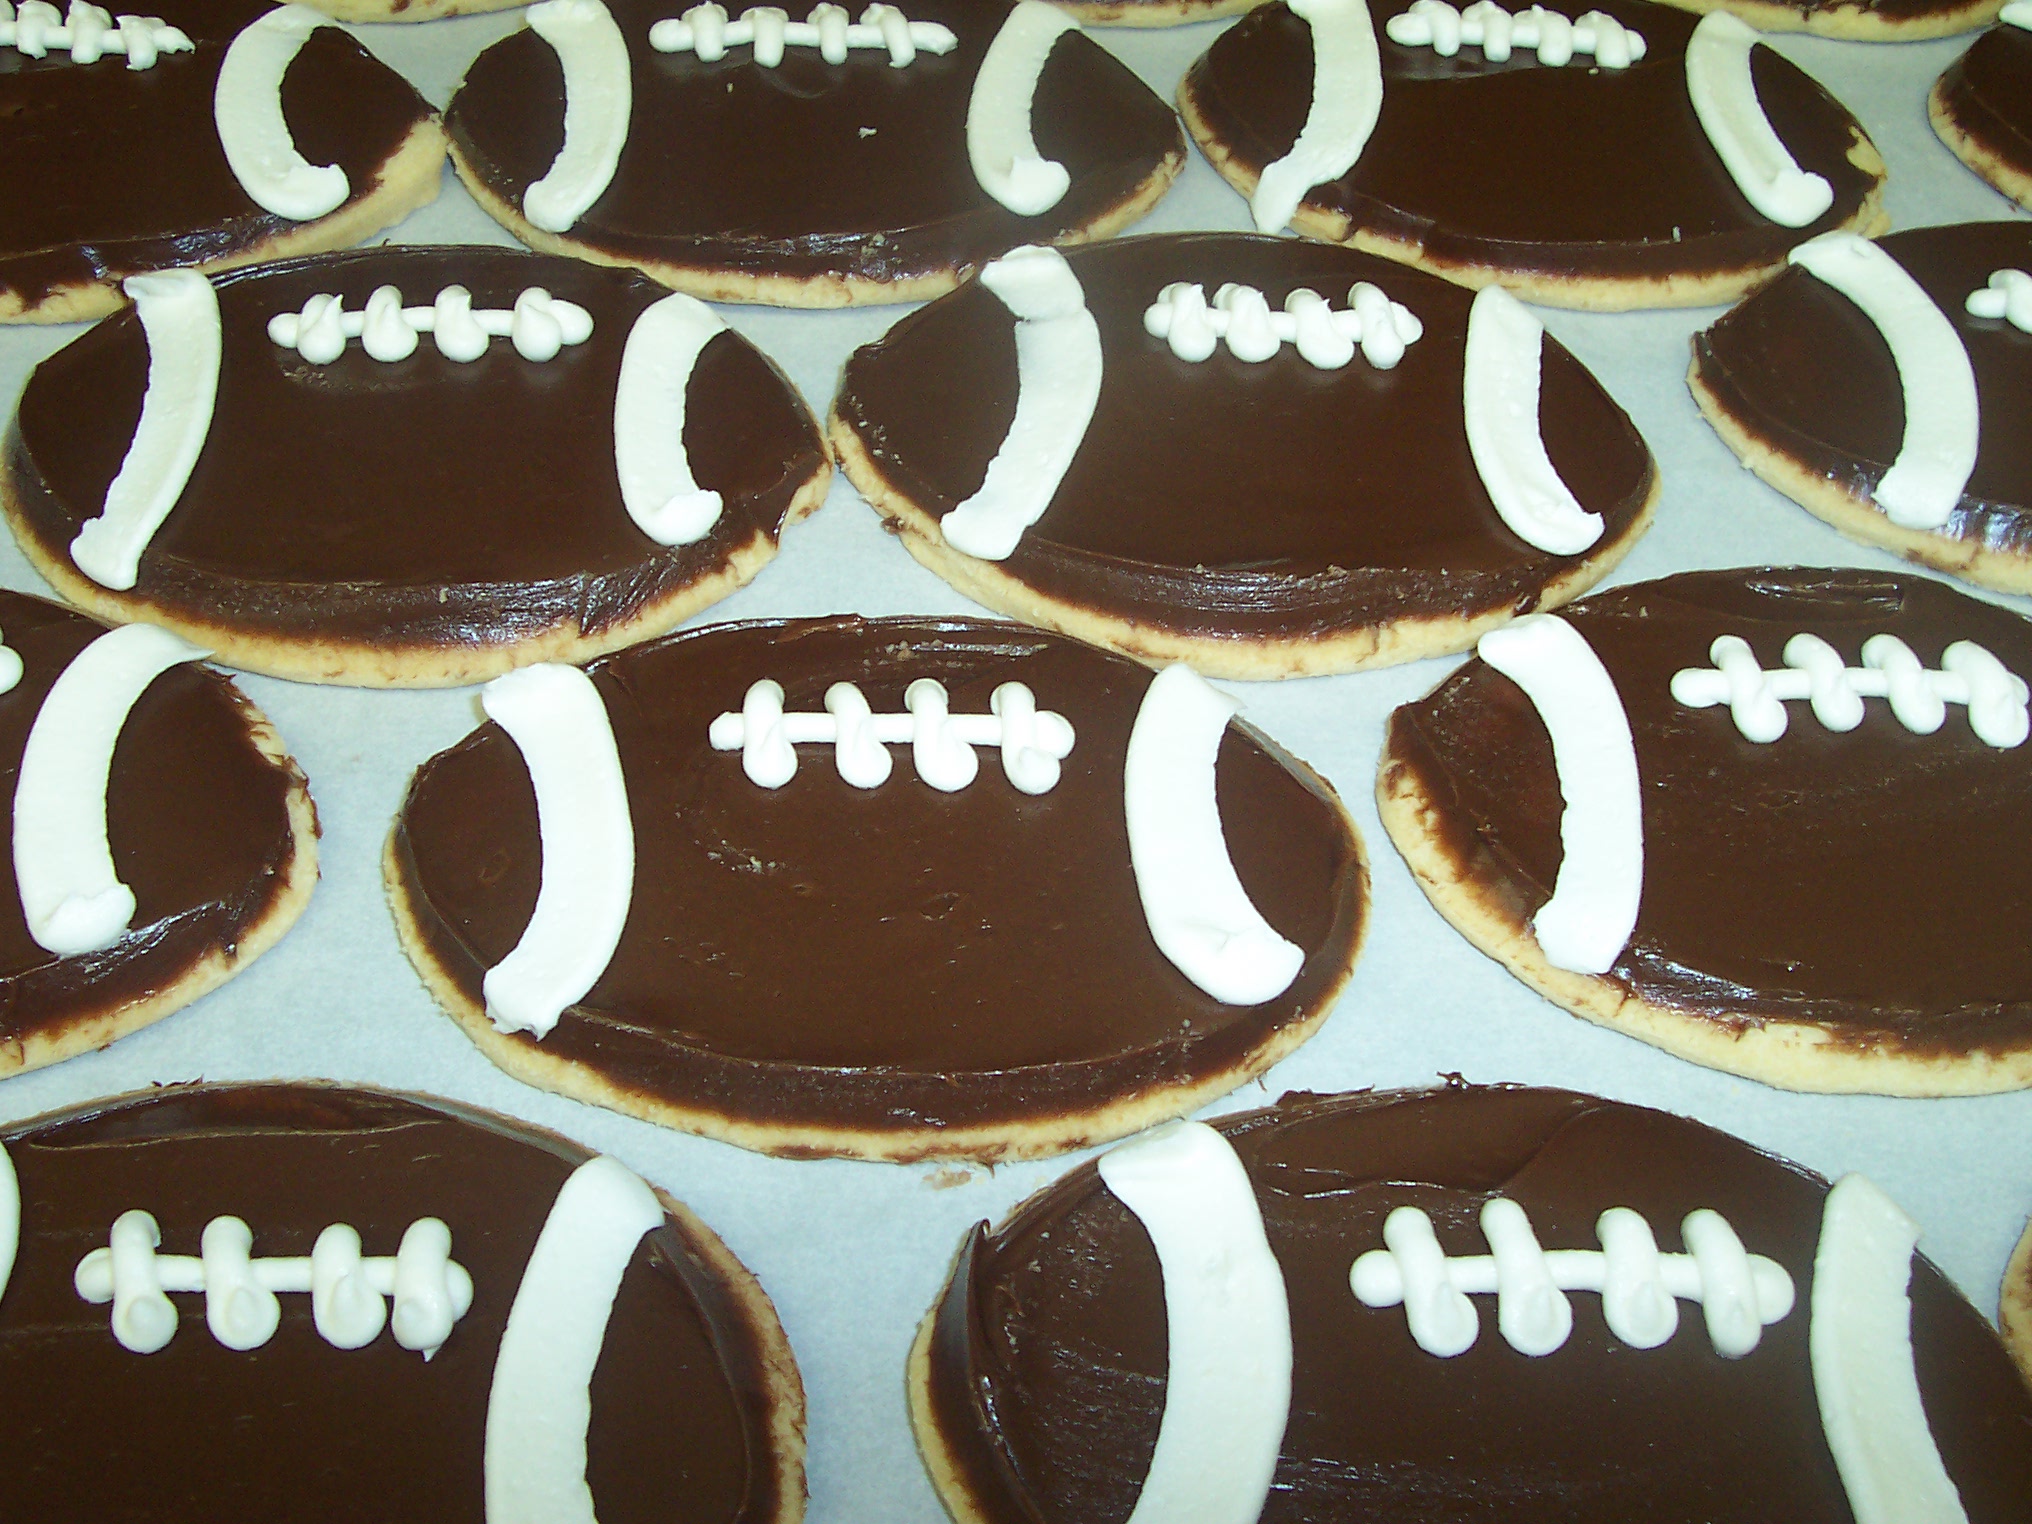 Football Cookies from Ohio Bakery